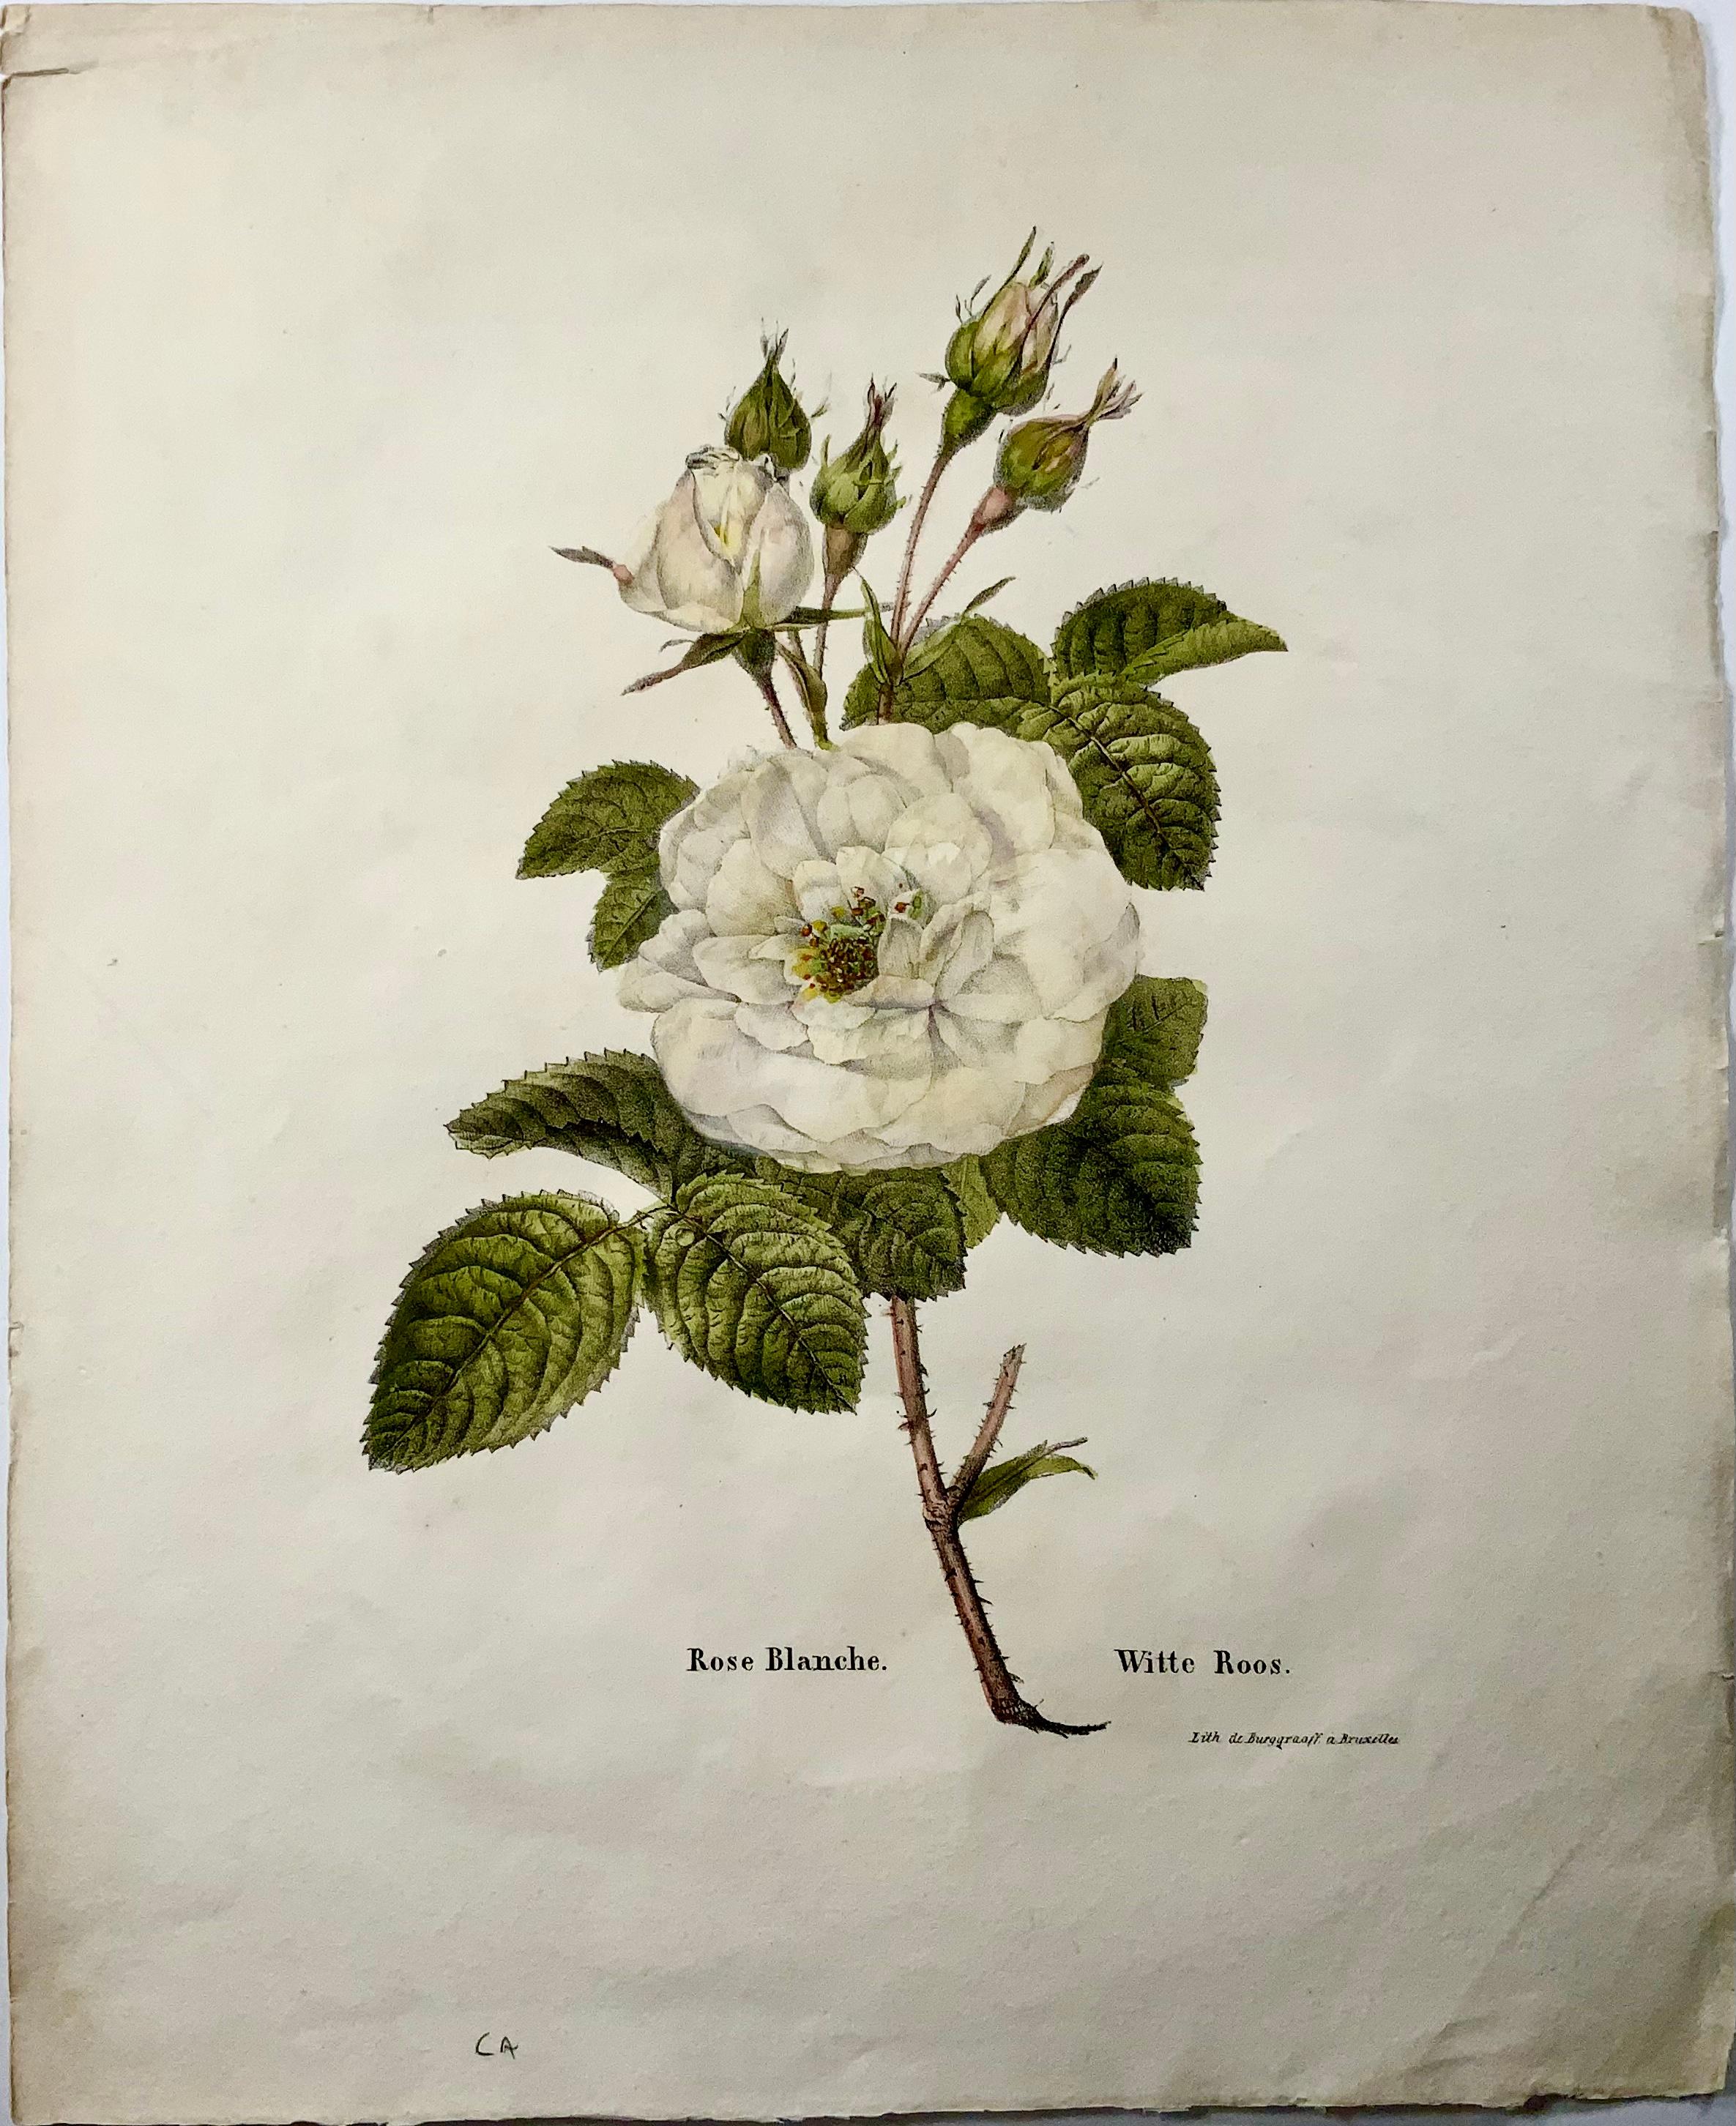 Exceedingly rare. No other example found worldwide.

Rose Blanche - Witte Roos

Measures: Large Folio: 33.5 x 27.2 cm

Lithographed by Guillaume Philidor Van den Burggraaff (b. 1790) and published in Brussels before his move to